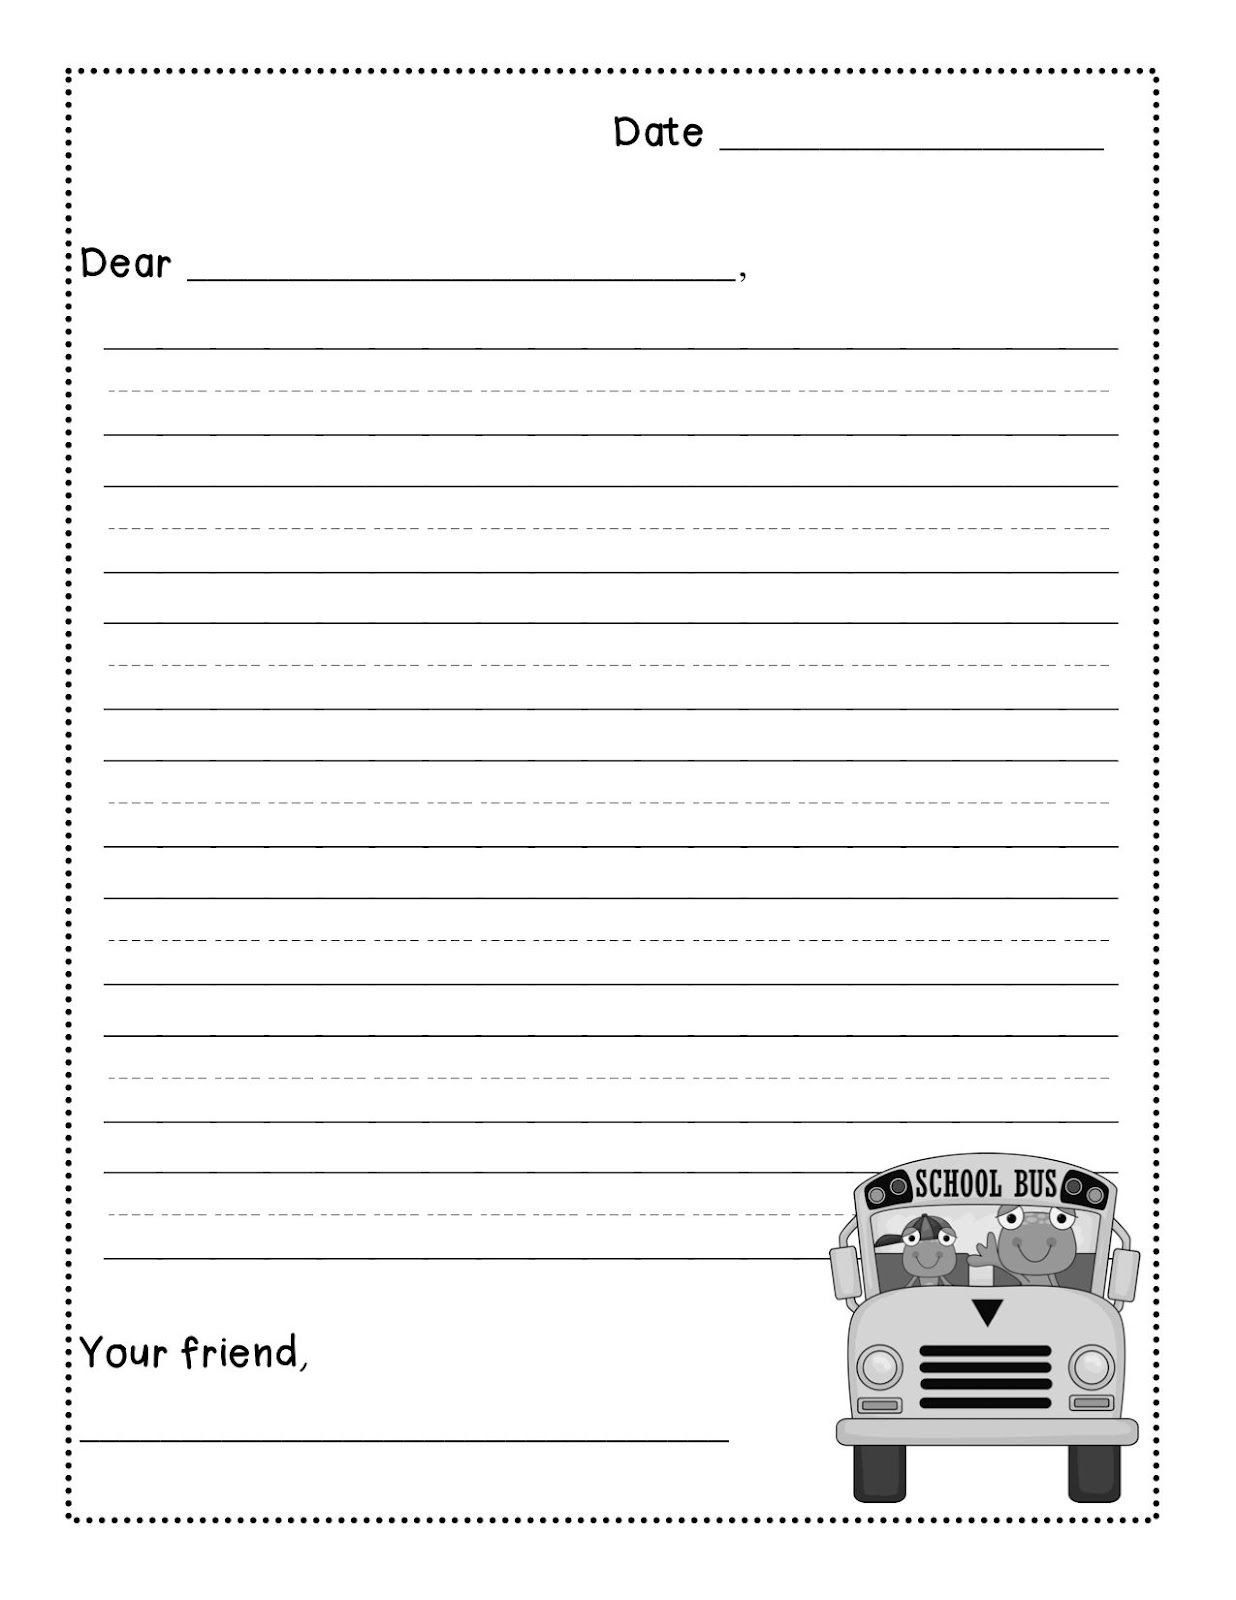 Friendly Letter Writing Freebie Levelized Templates Up 